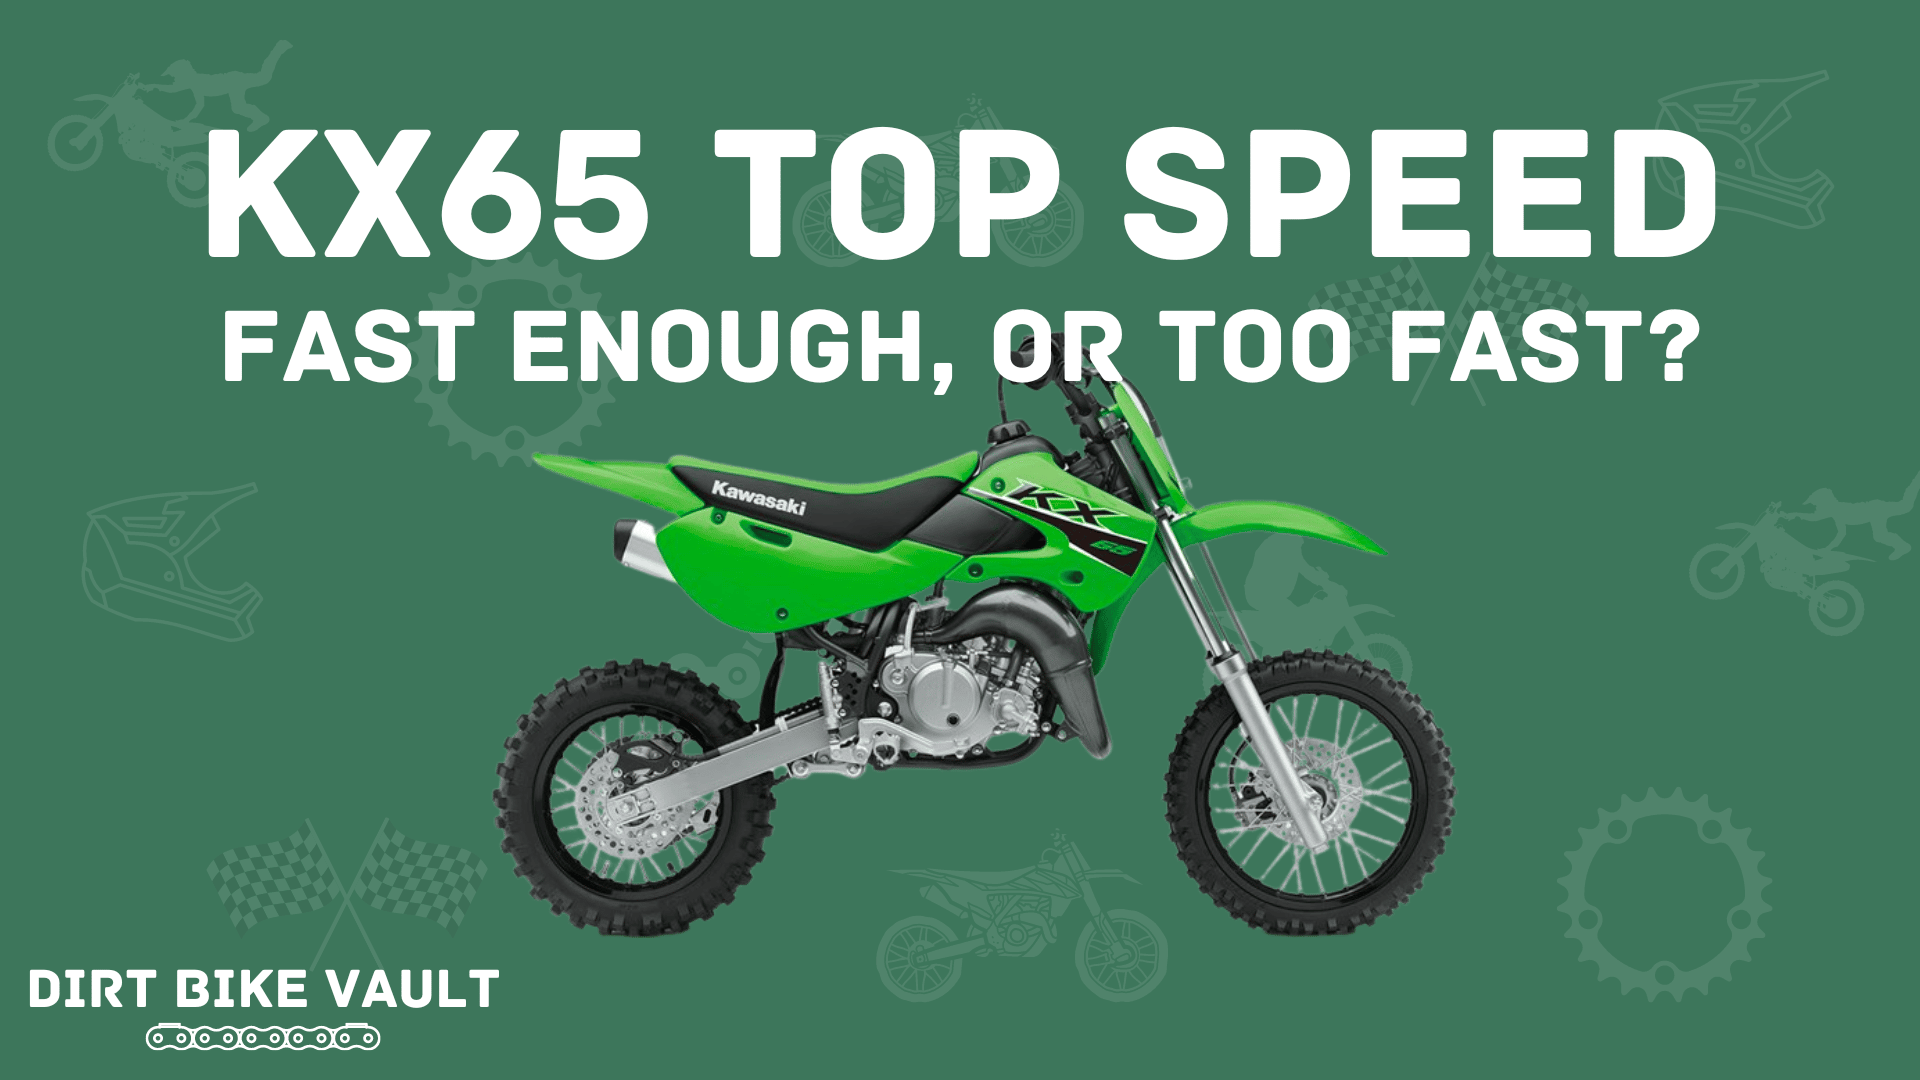 KX65 top speed in white text with image of Kawasaki KX65 dirt bike on green background